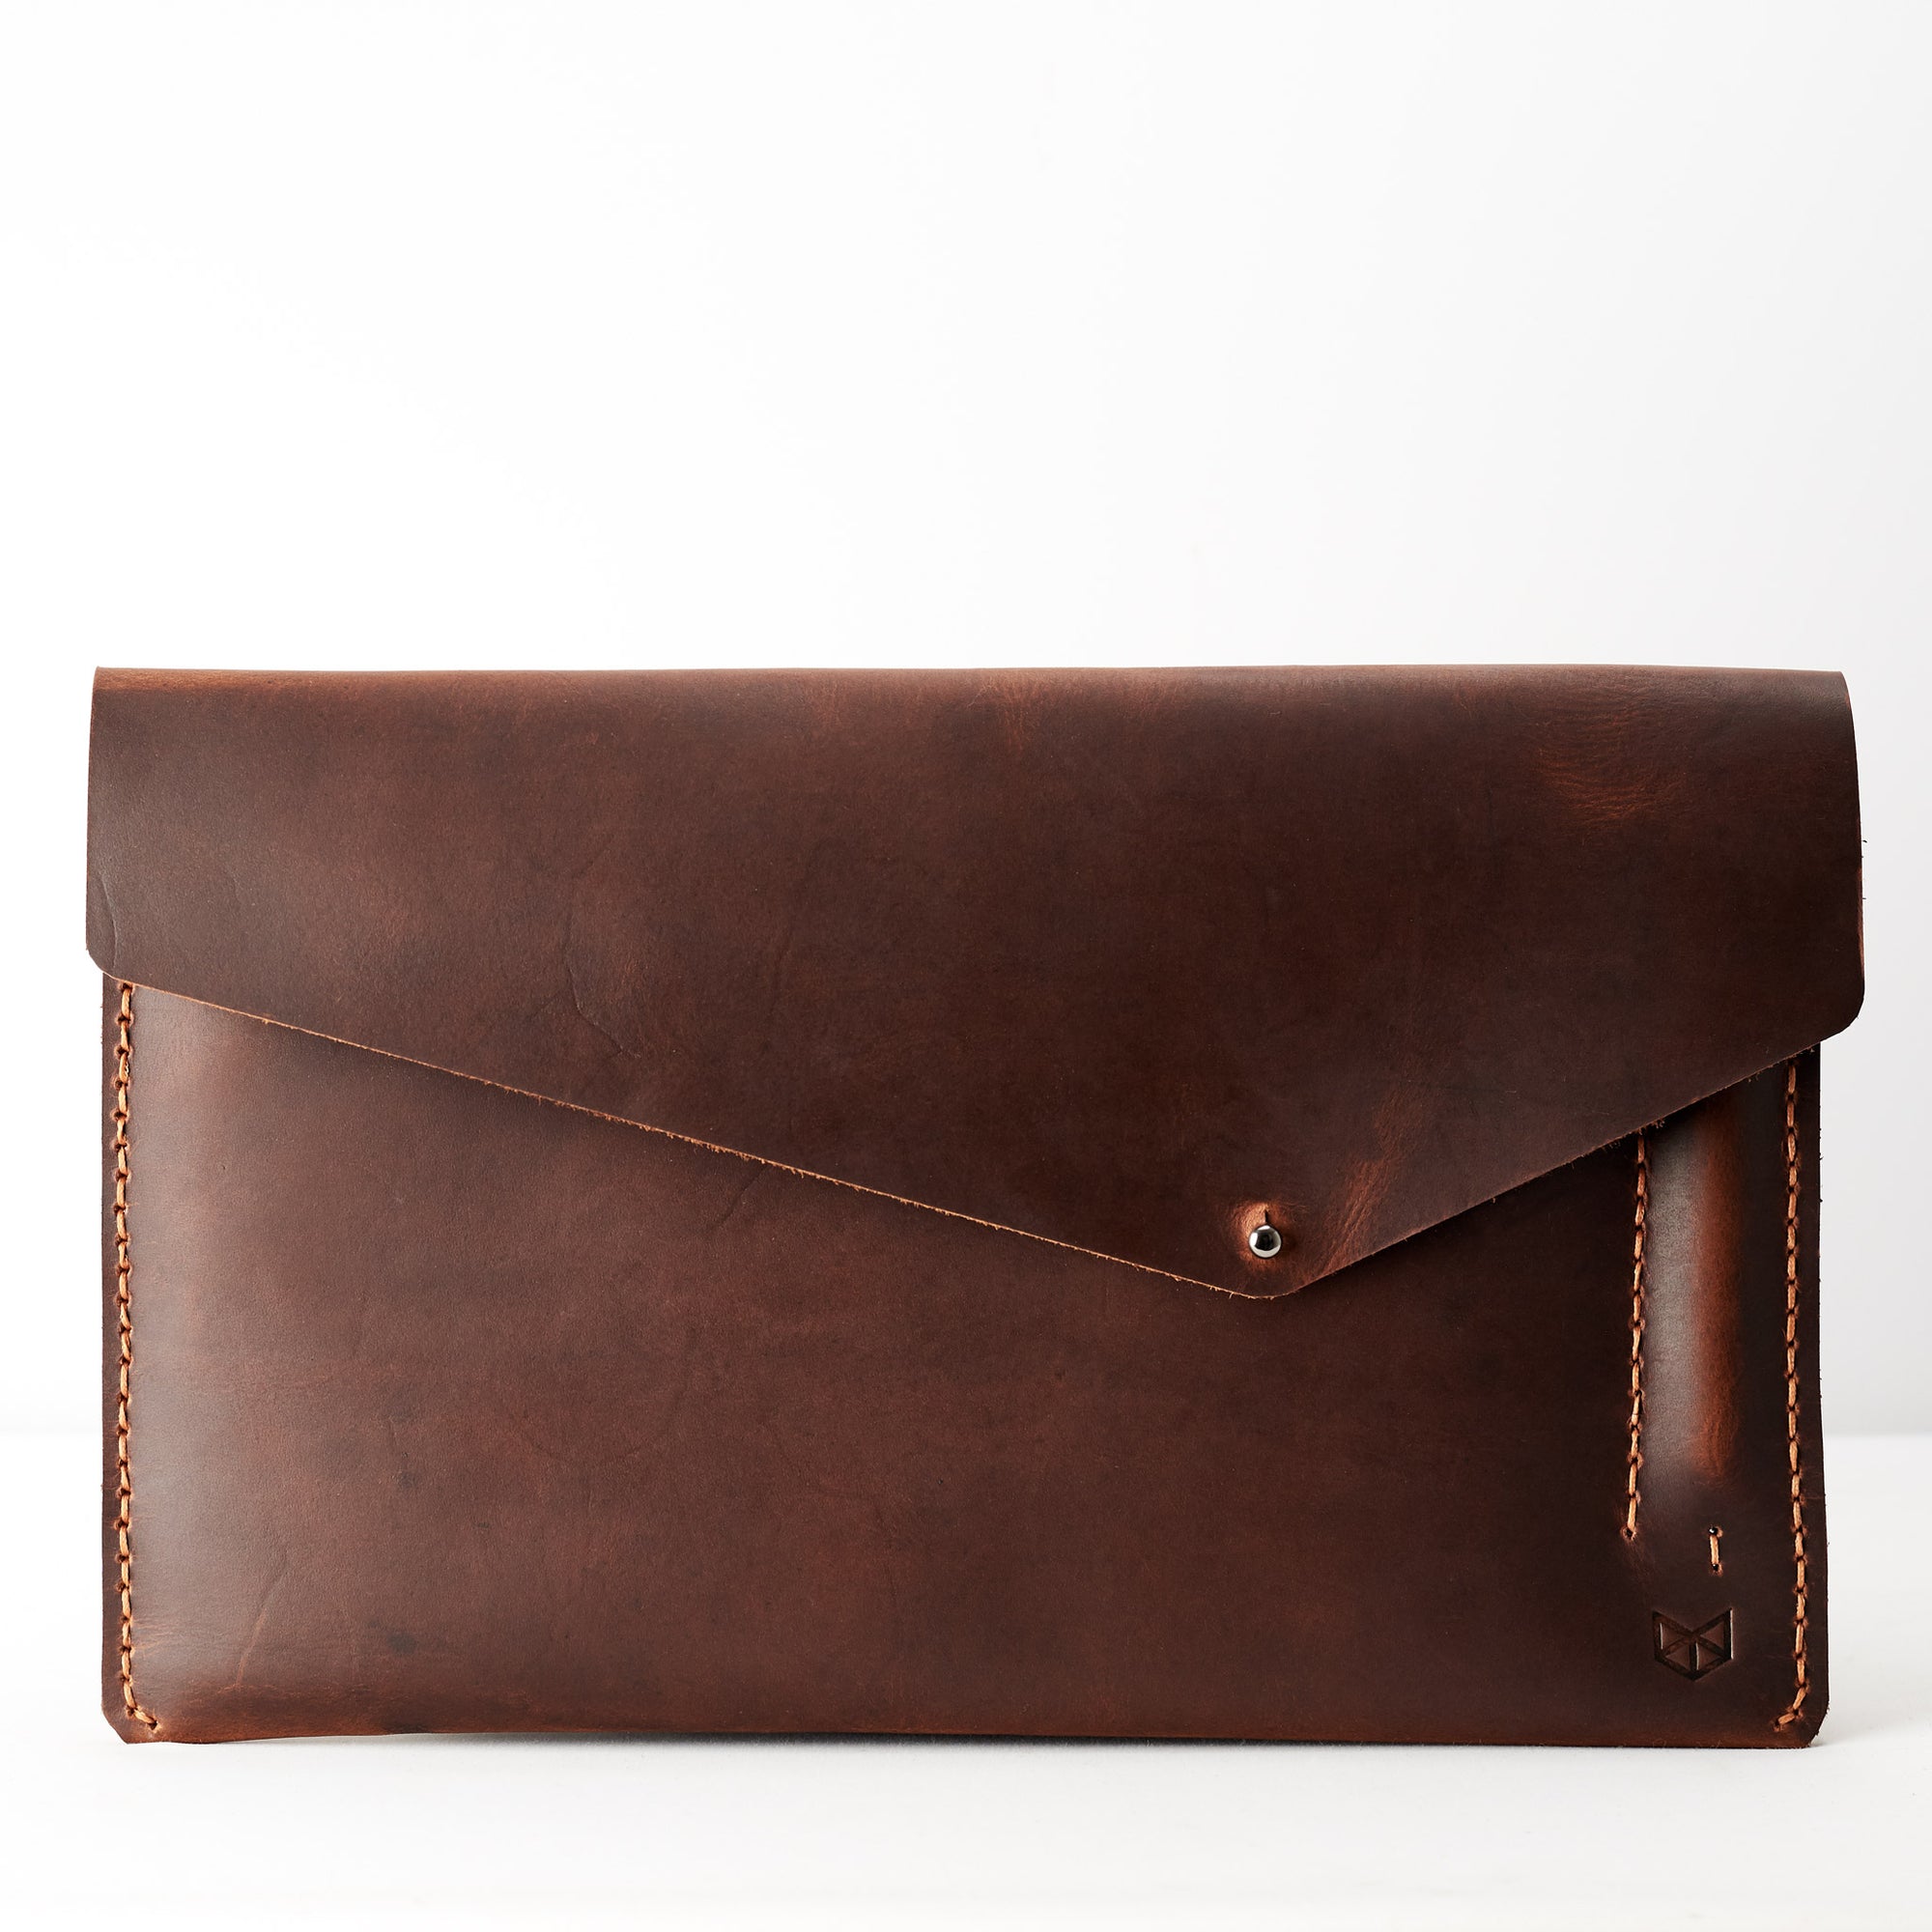 Closed. Google Pixel Slate Sleeve Case Distressed Tan by Capra Leather